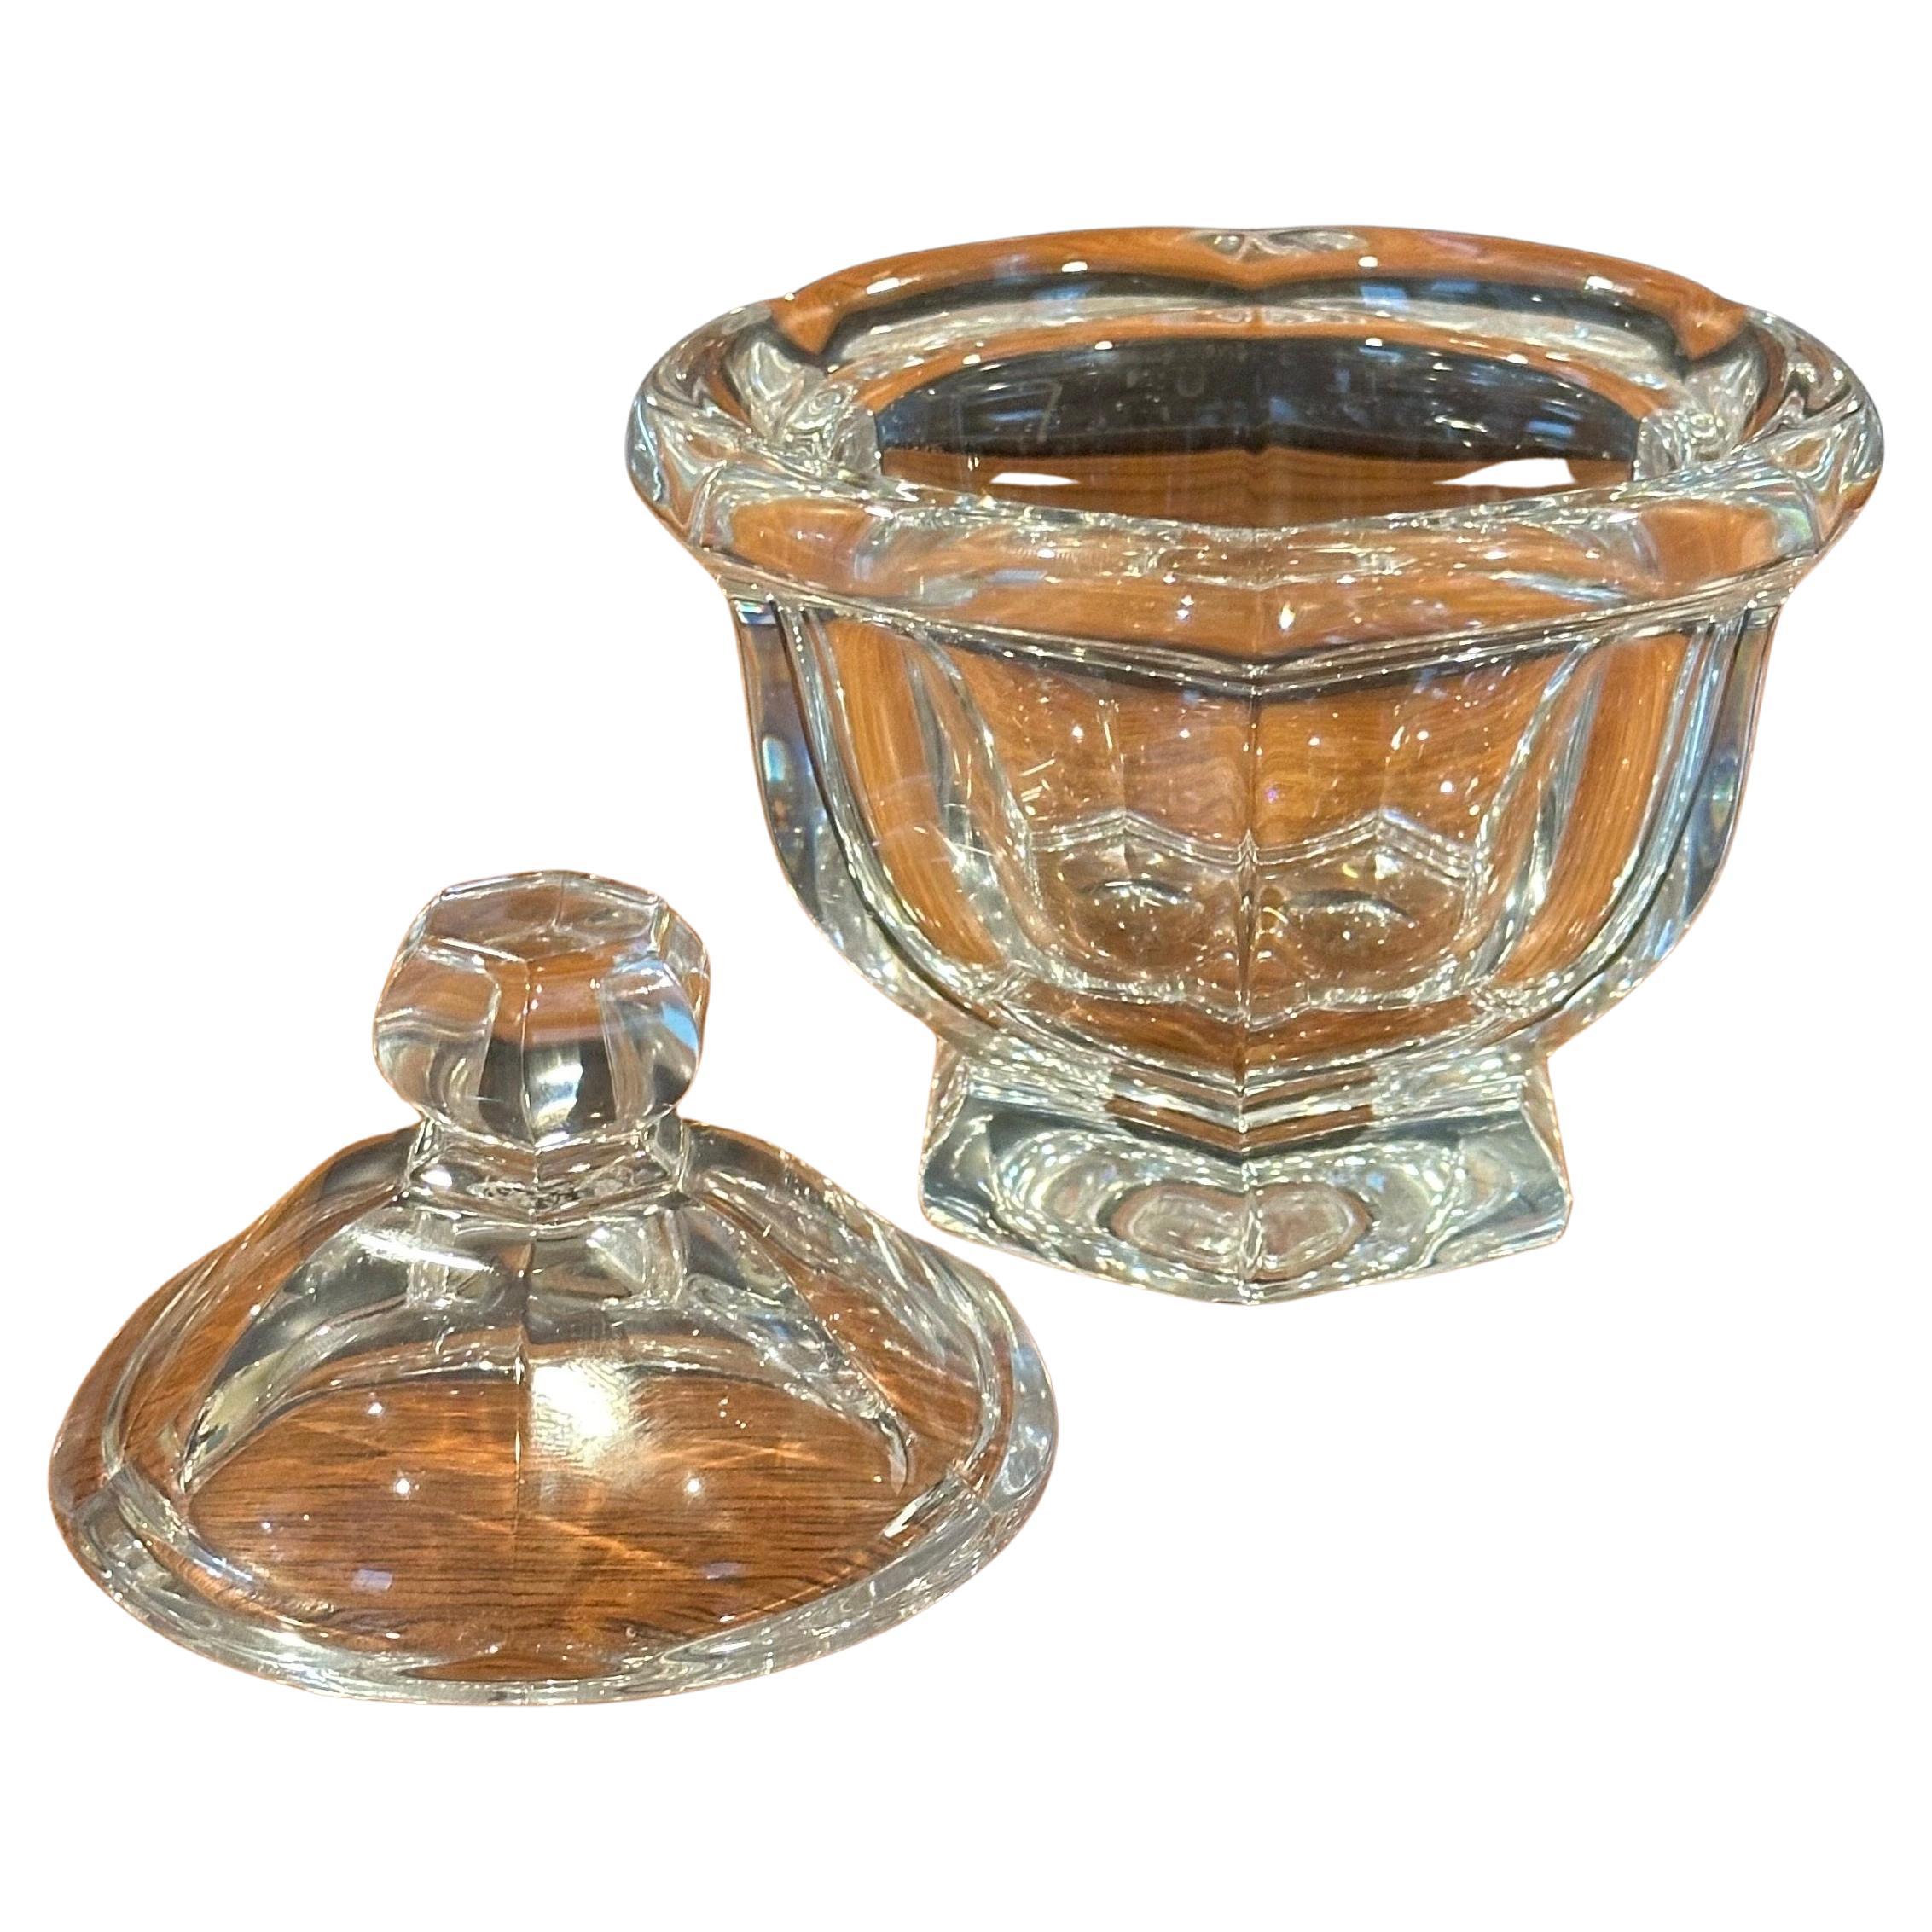 A very nice small crystal lidded candy bowl by Baccarat, circa 1990s. The piece is in excellent condition with no visible imperfections and has great clarity. Signed on the underside, the piece measures 5